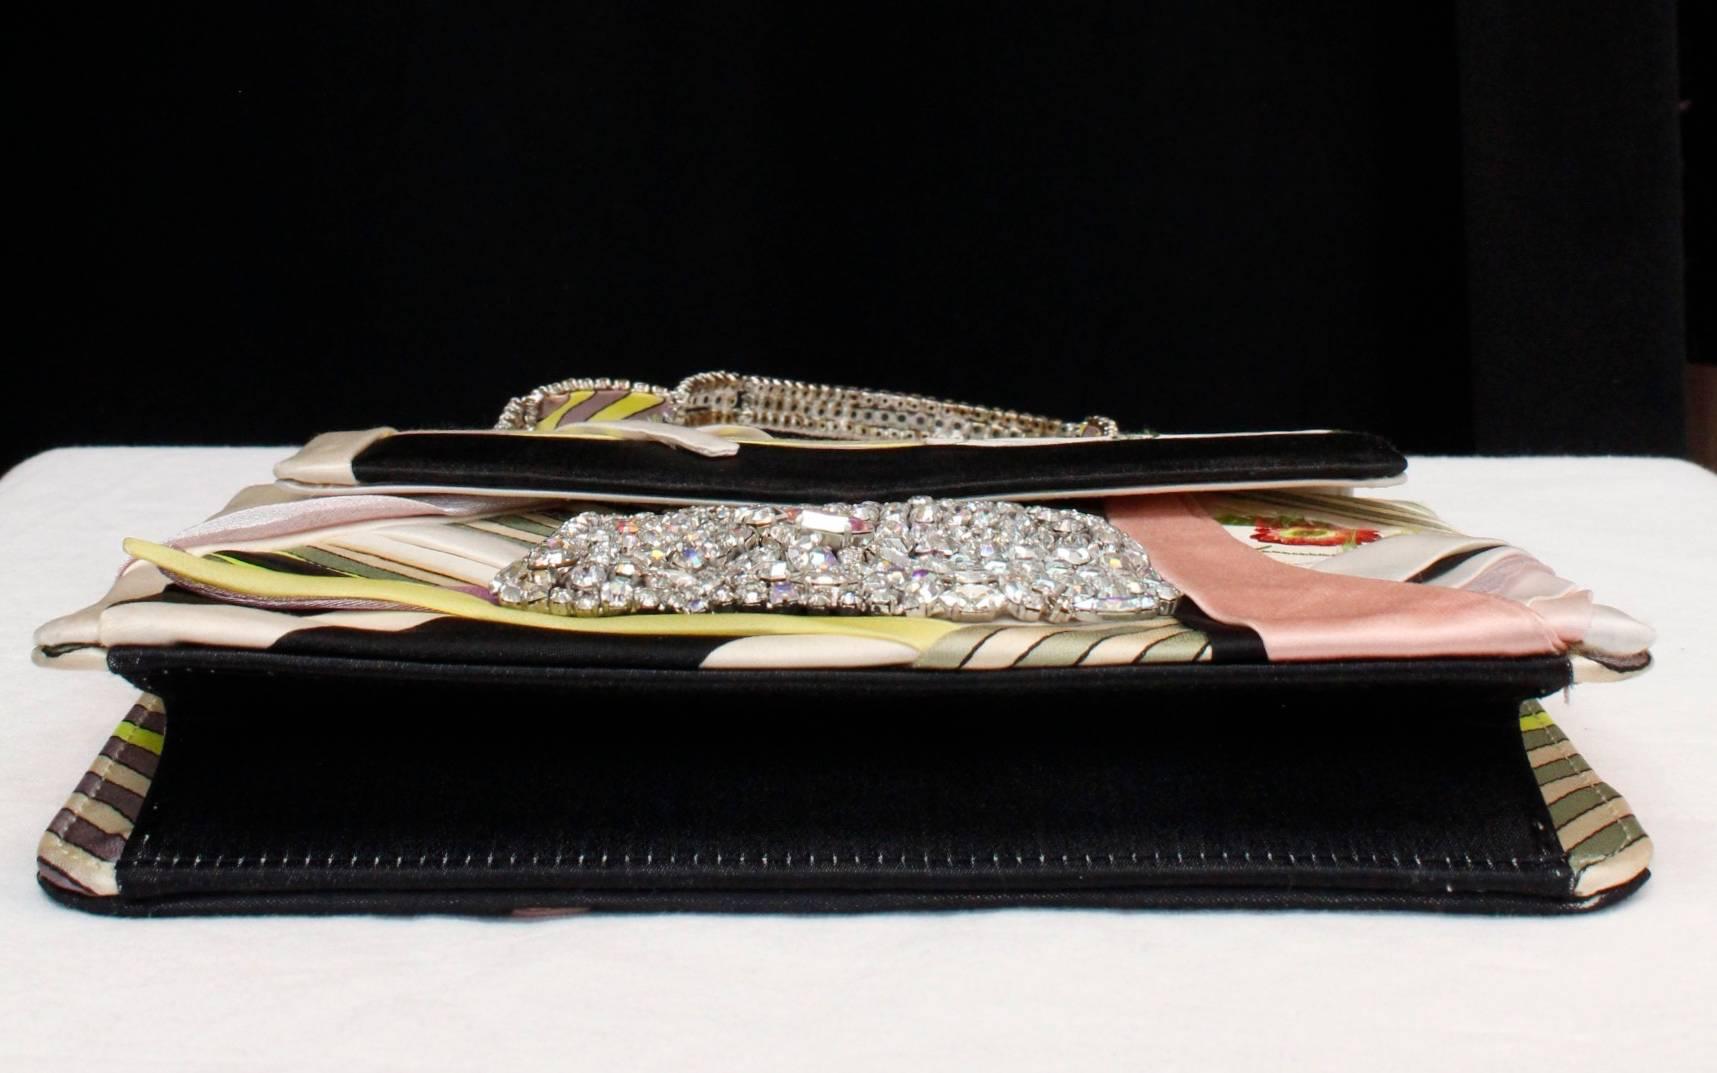 Women's 1990s Christian Lacroix evening bag composed of fabric patchwork and rhinestones